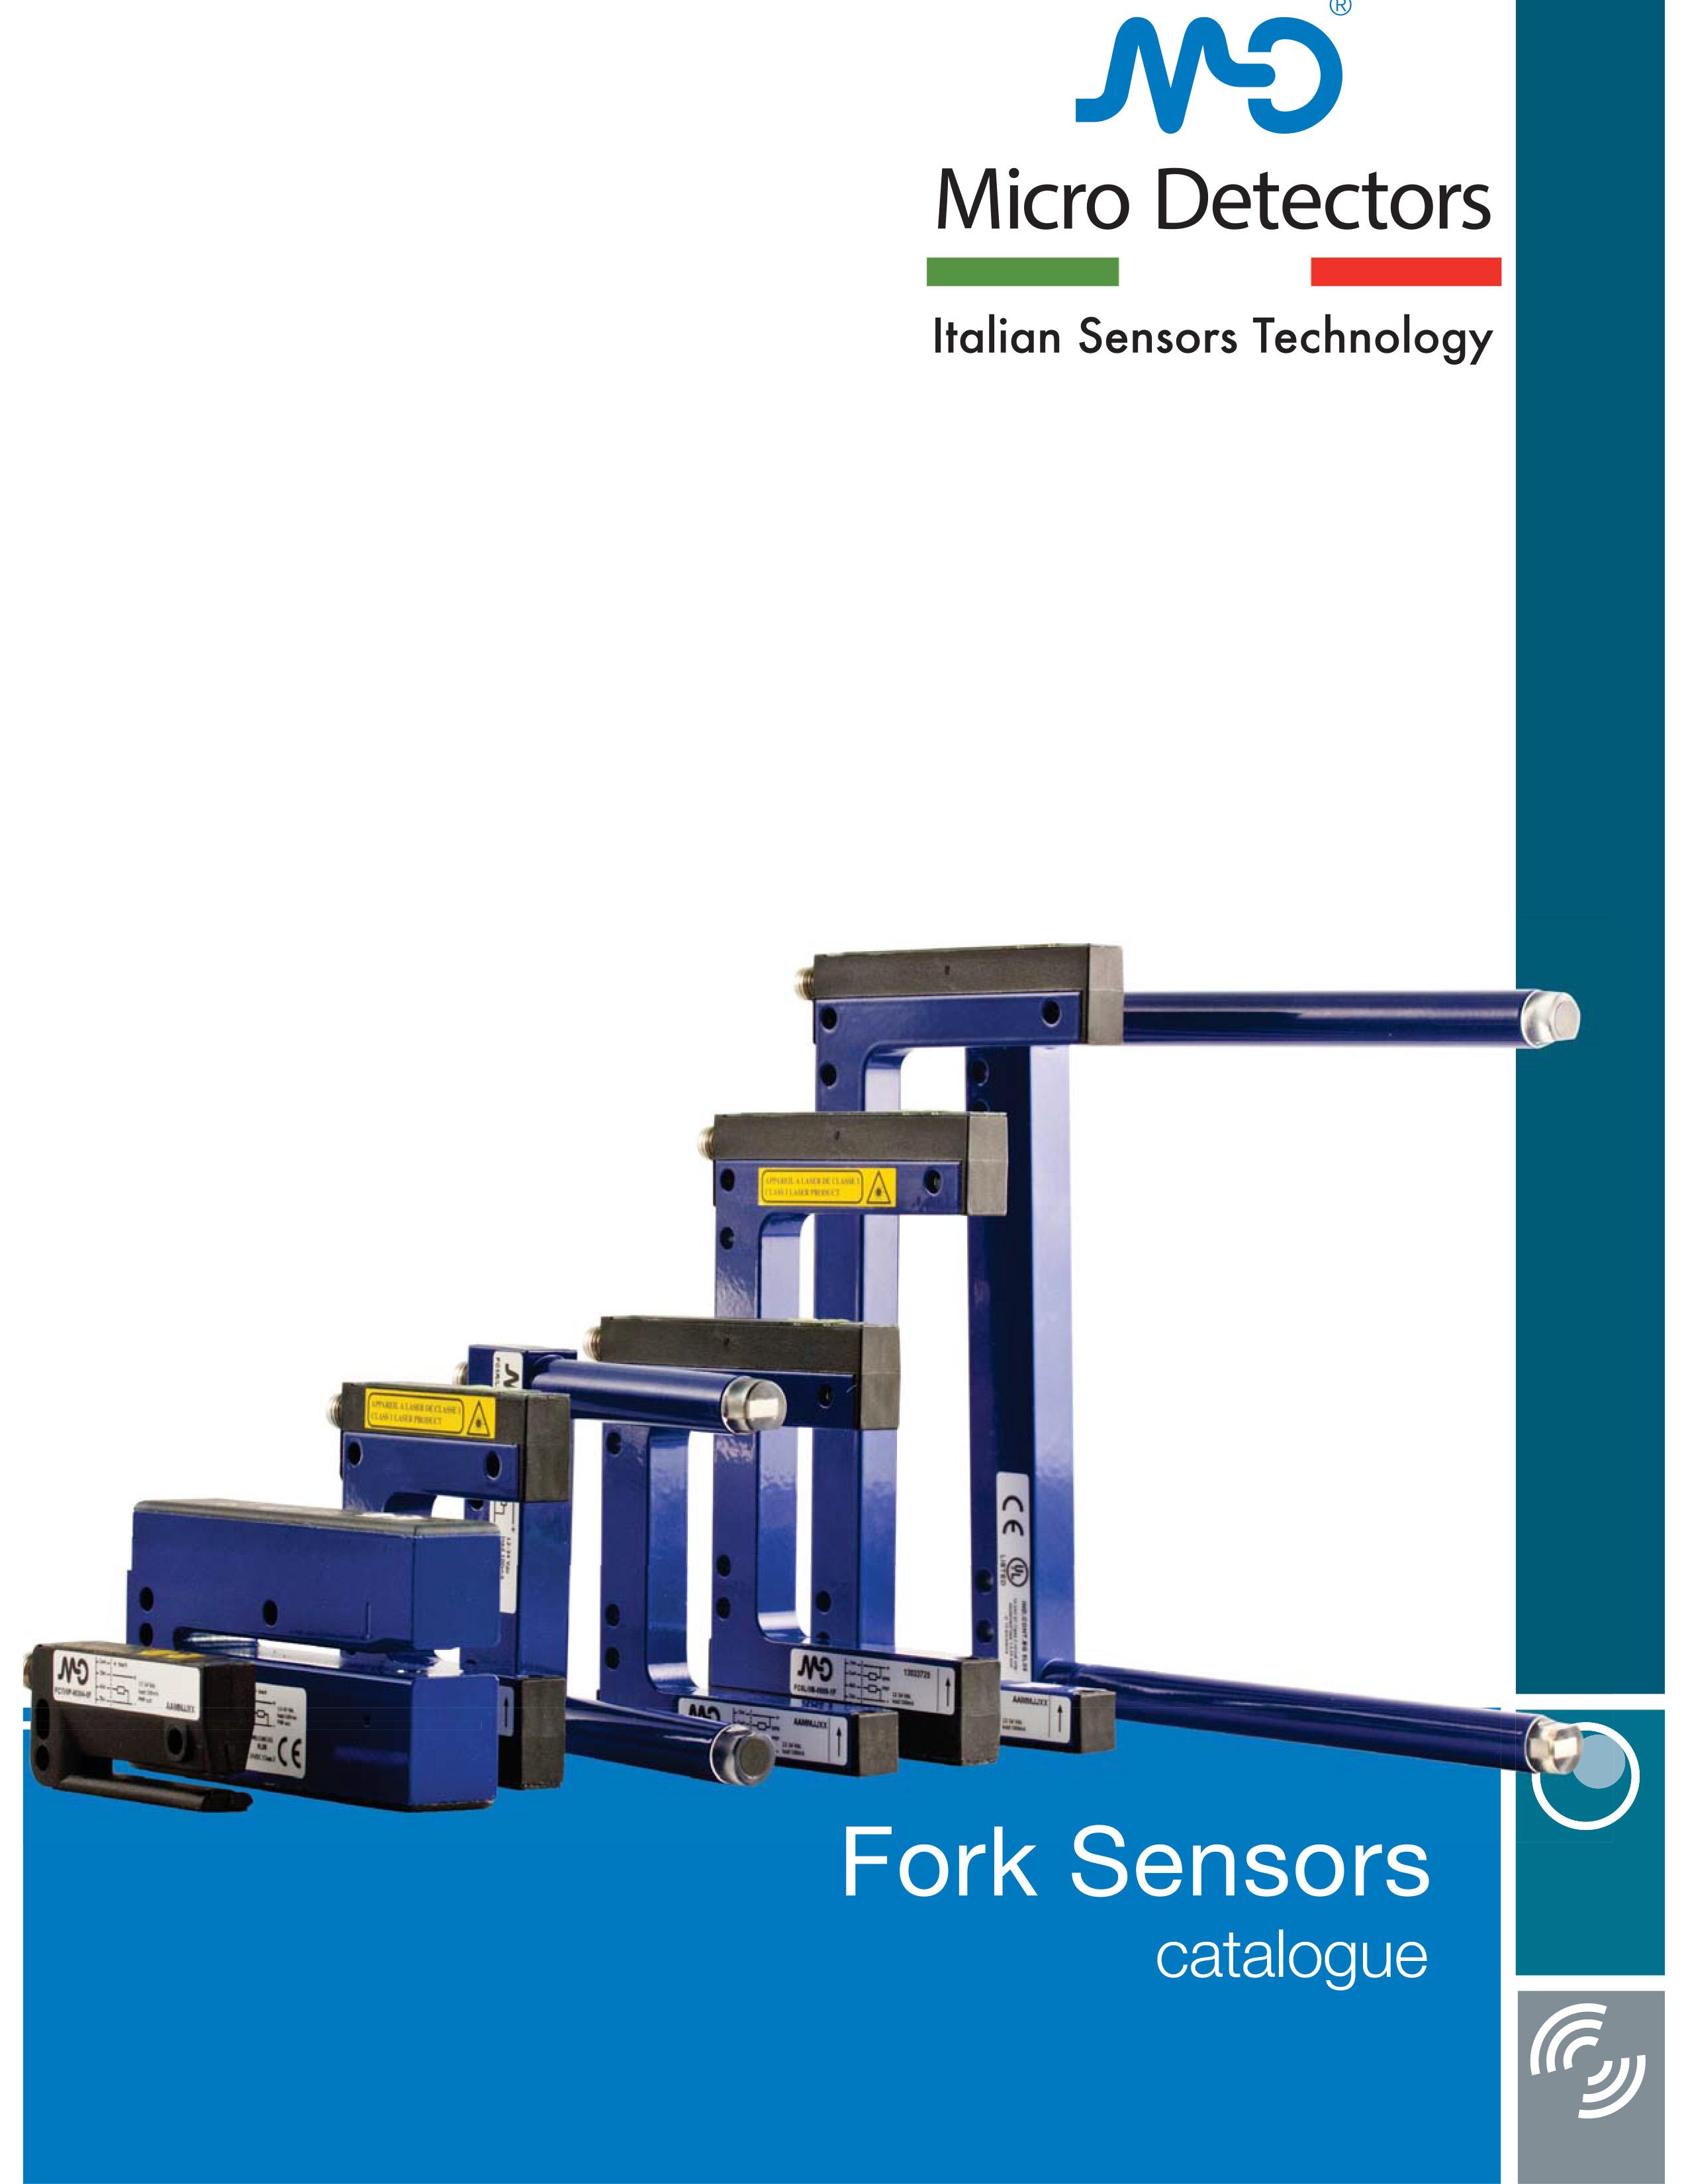 Micro Detectors Fork Sensors supplied by ElectroMechanica